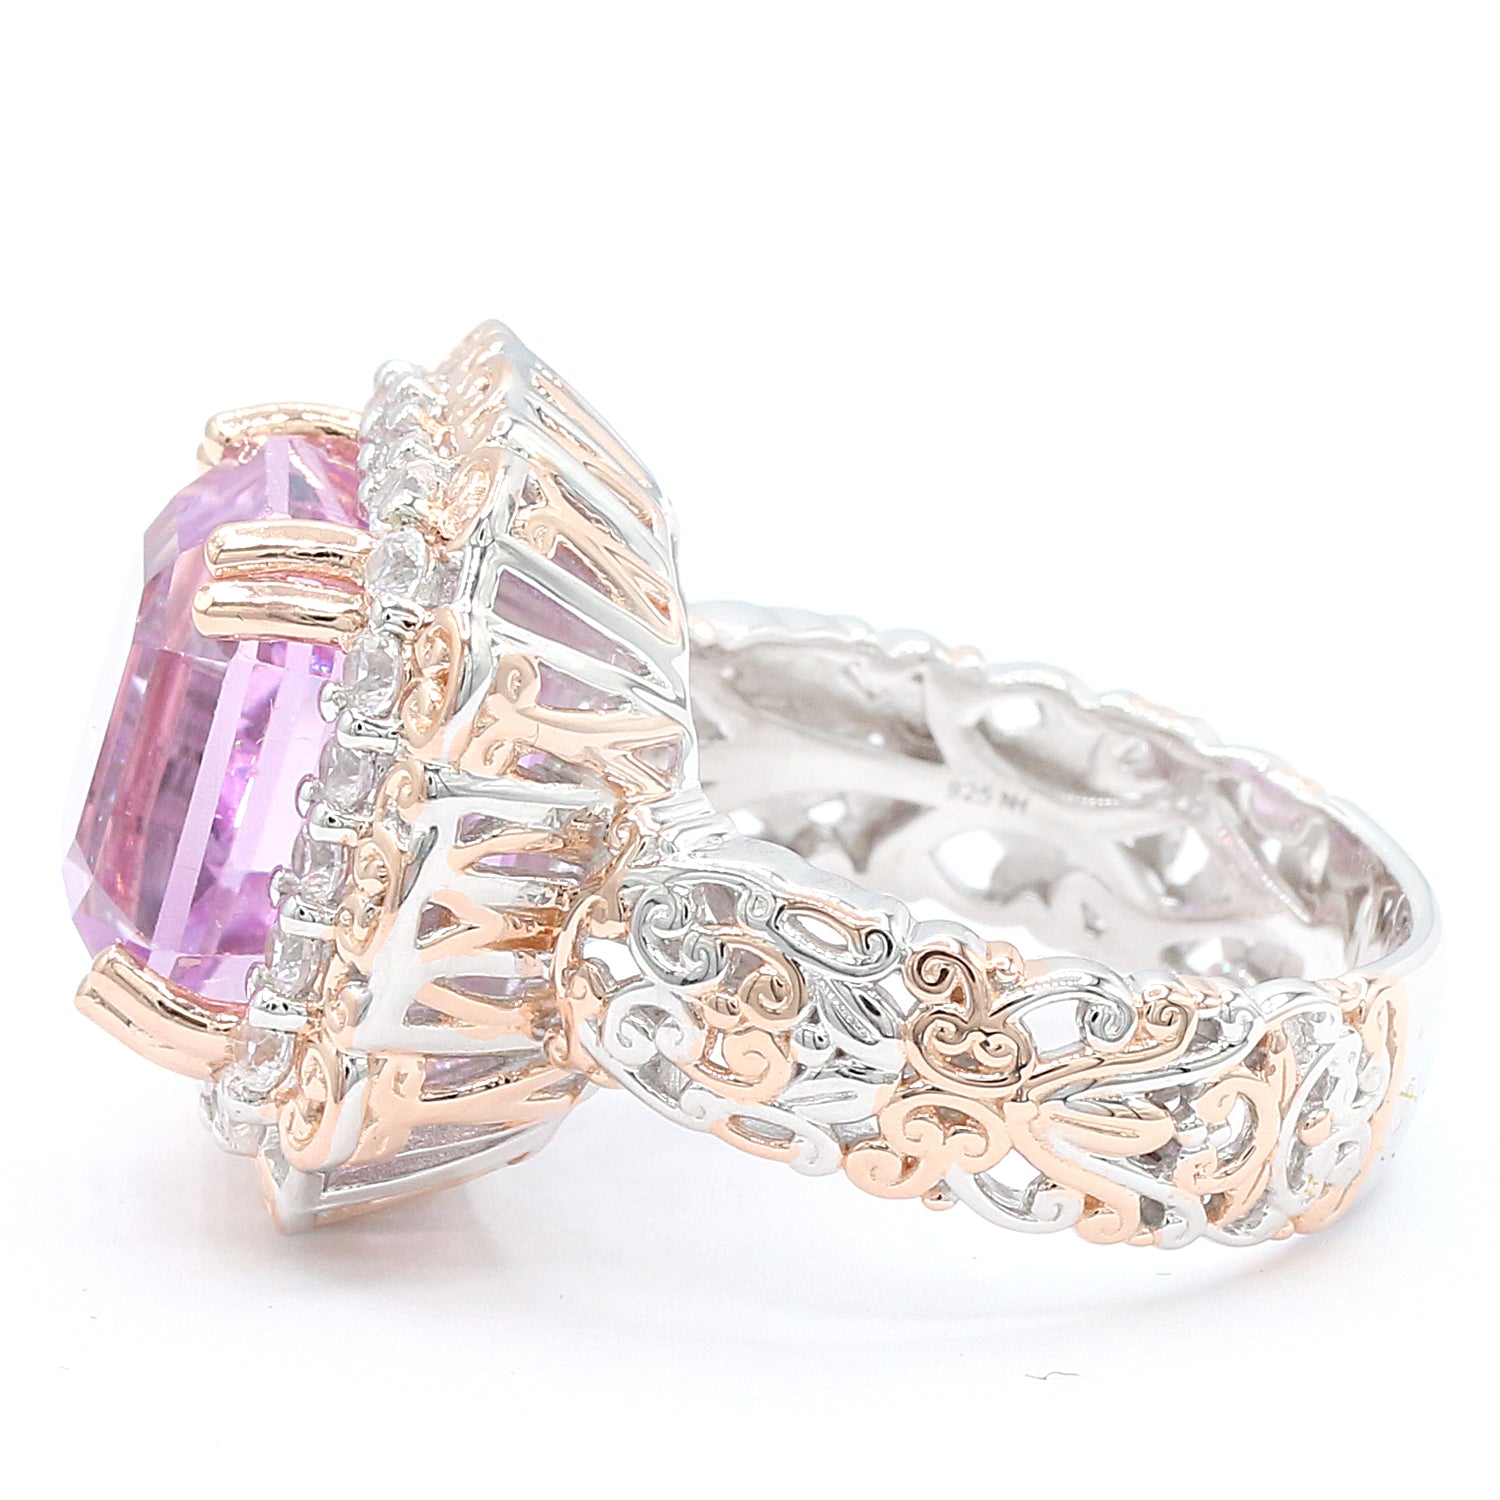 Limited Edition Gems en Vogue Luxe One-of-a-Kind 11.52ctw Kunzite & White Zircon Halo Ring